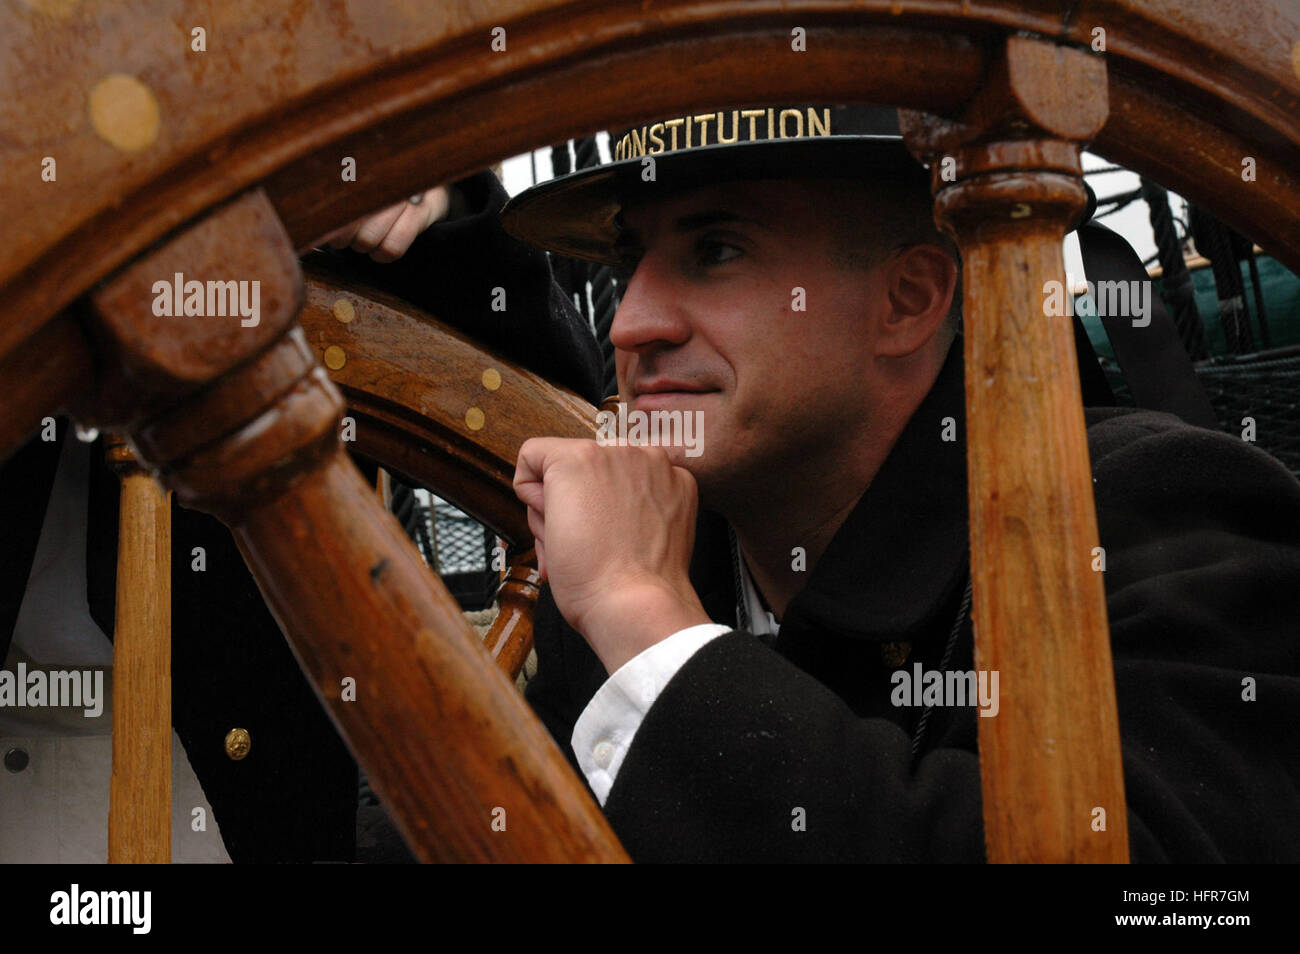 060610-N-5322S-003 Boston (June 10, 2006) - Boatswain Mate 2nd Class Michael Shippee mans the ship's helm aboard 'Old Ironsides' as it is taken out into Boston Harbor for the first time this year during a turnaround cruise in Boston Harbor. The turn-around cruise is one of the high points of Boston Navy Week. Twenty-four such weeks are planned this year in cities throughout the U.S., arranged by the Navy Office of Community Outreach (NAVCO). NAVCO is tasked with enhancing the Navy's brand image in areas with limited exposure to the Navy. U.S. Navy photo by Seaman Michelle Sowers (RELEASED) US  Stock Photo